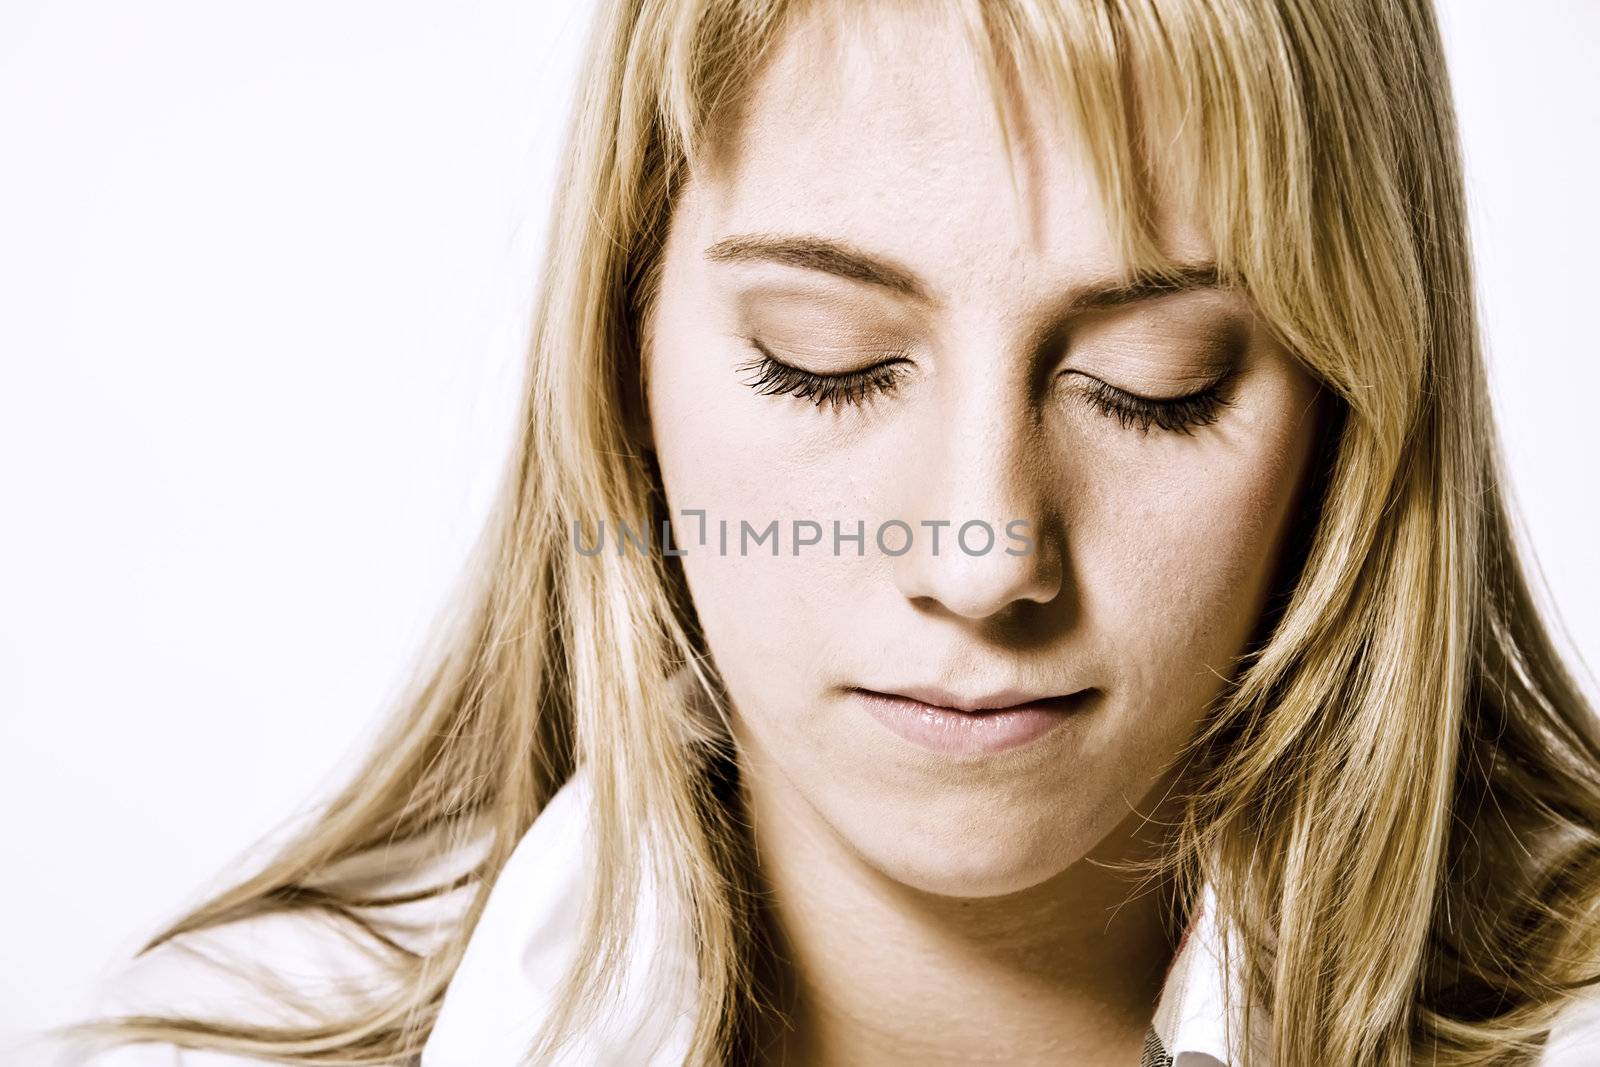 Studio portrait of a long blond girl looking relaxed